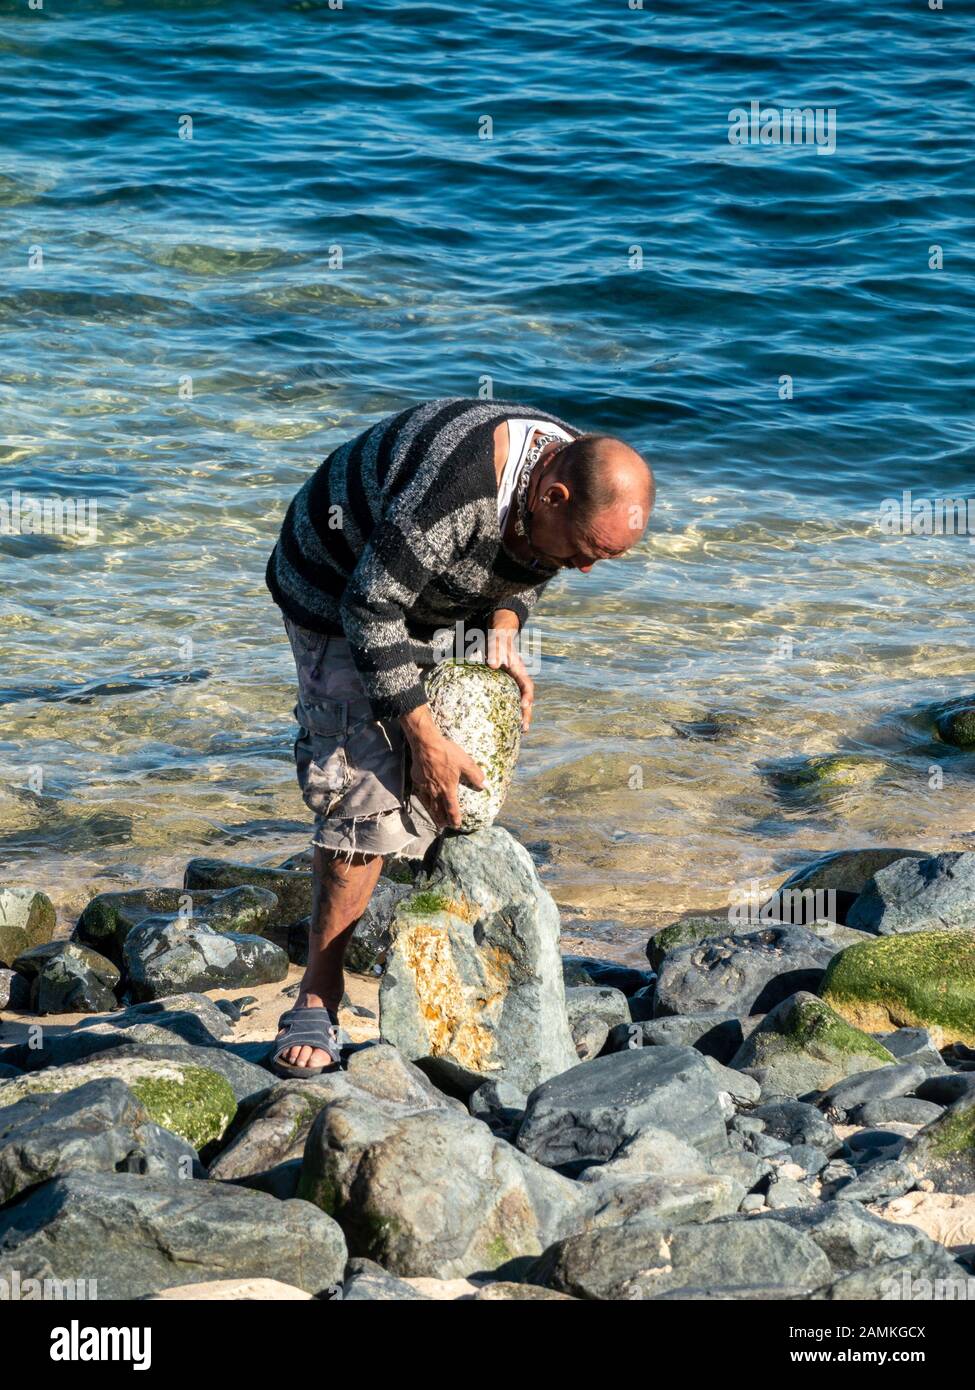 Balanced rock artist creating balanced stone sculptures our of beach pebbles on St Ives, Cornwall, England, UK Stock Photo